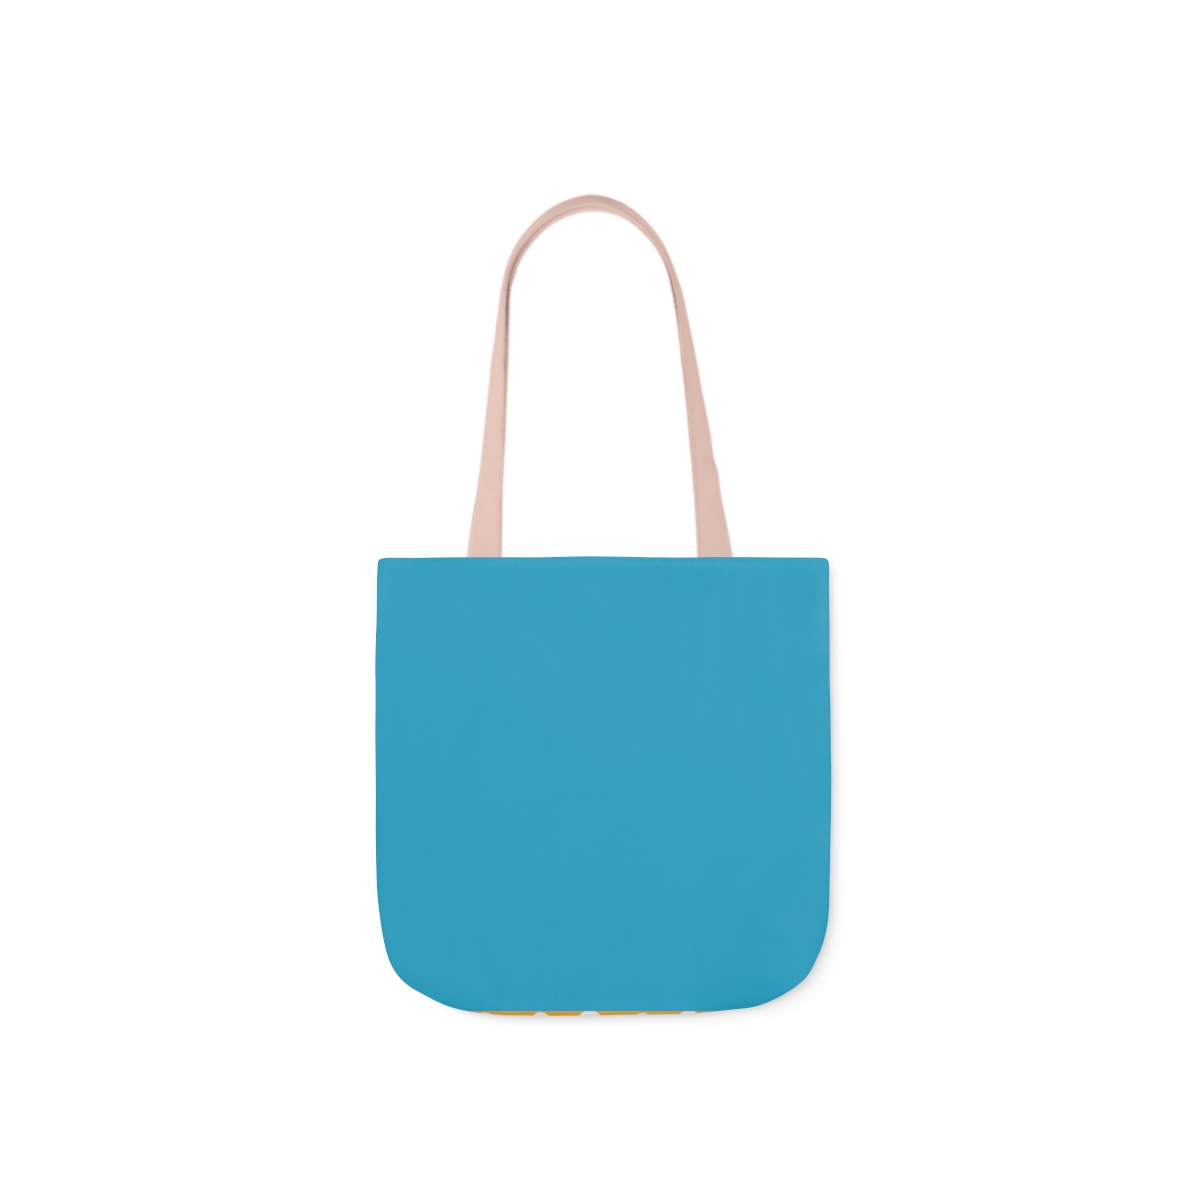 STAY SALTY -- Polyester Canvas Tote Bag (AOP) product thumbnail image